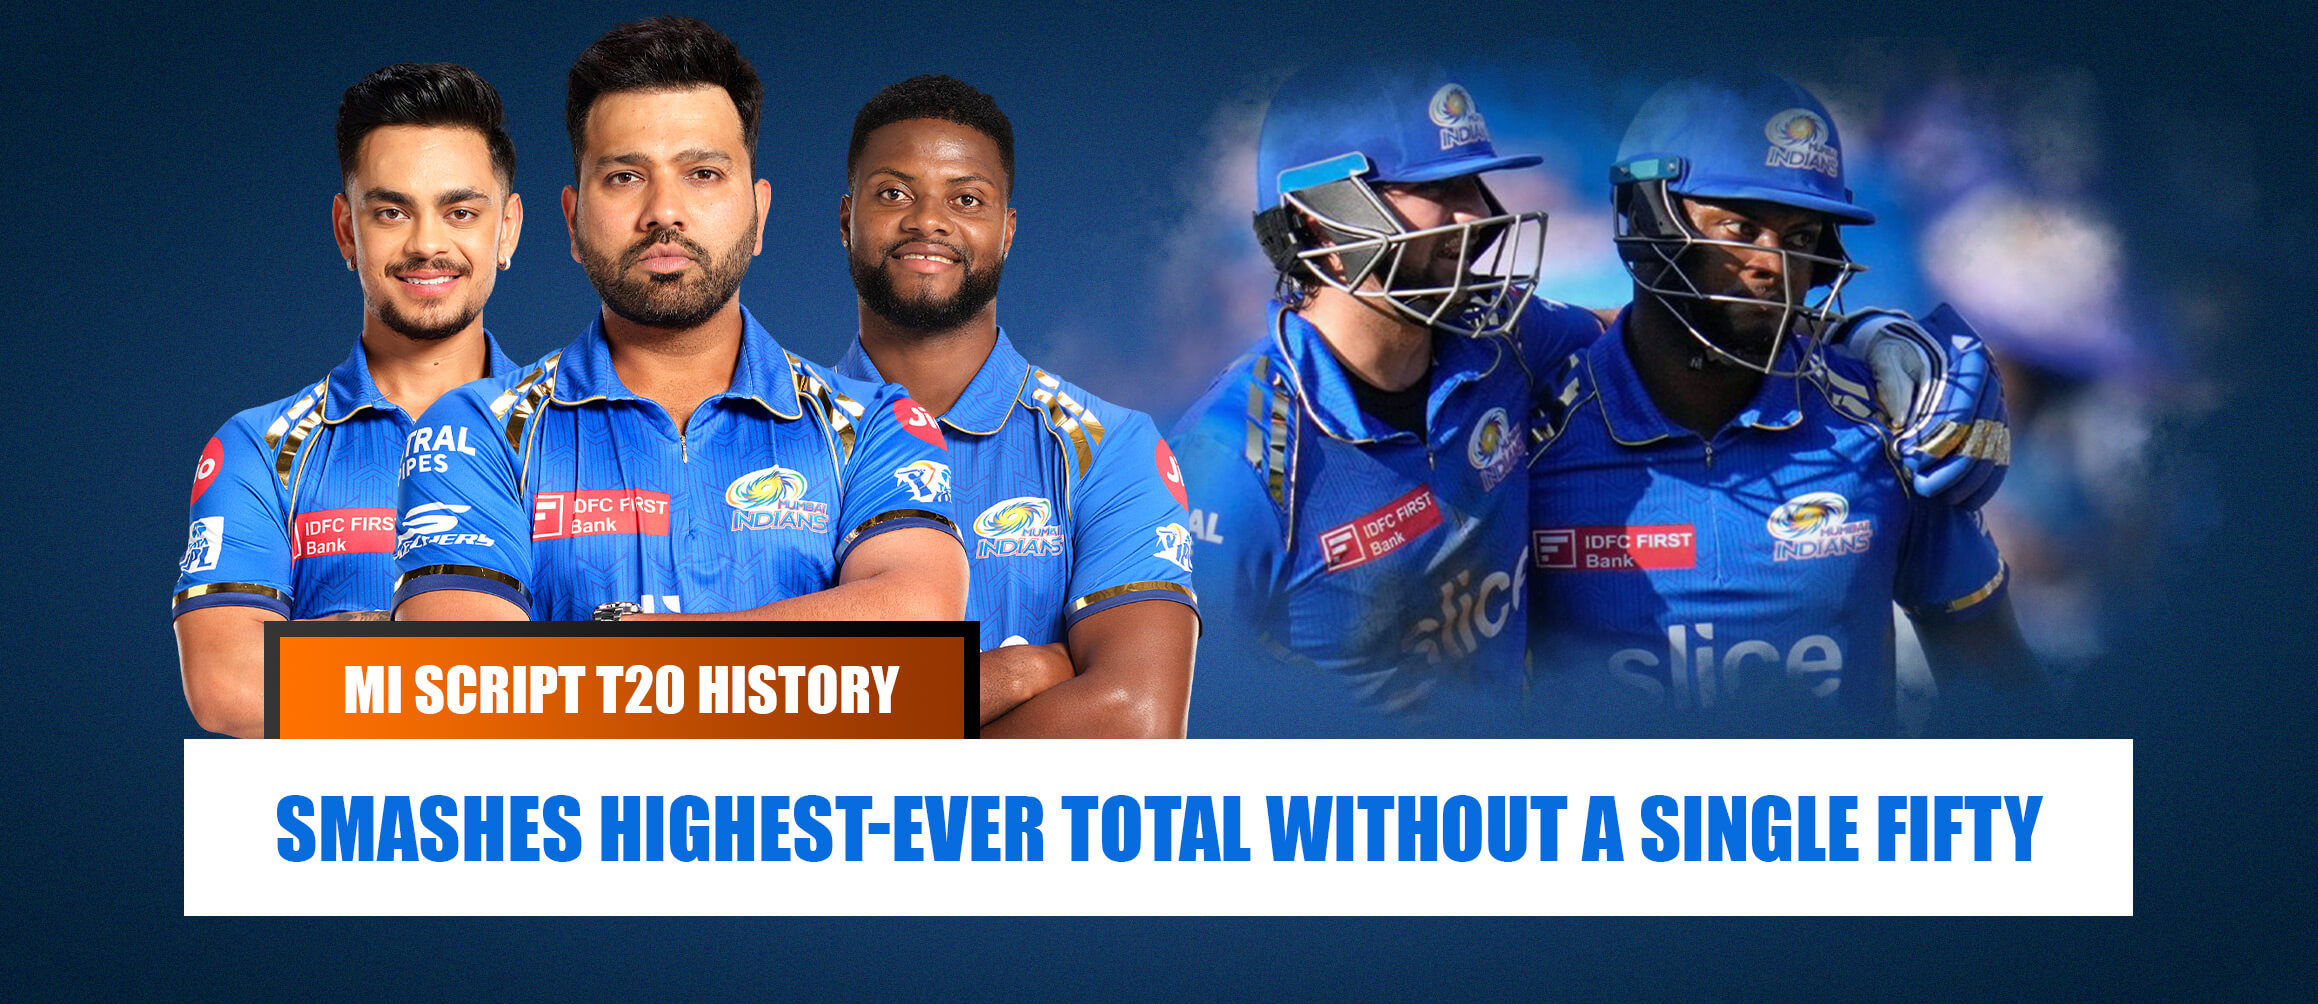 MI Script T20 History, Smashes Highest-Ever Total Without a Single Fifty